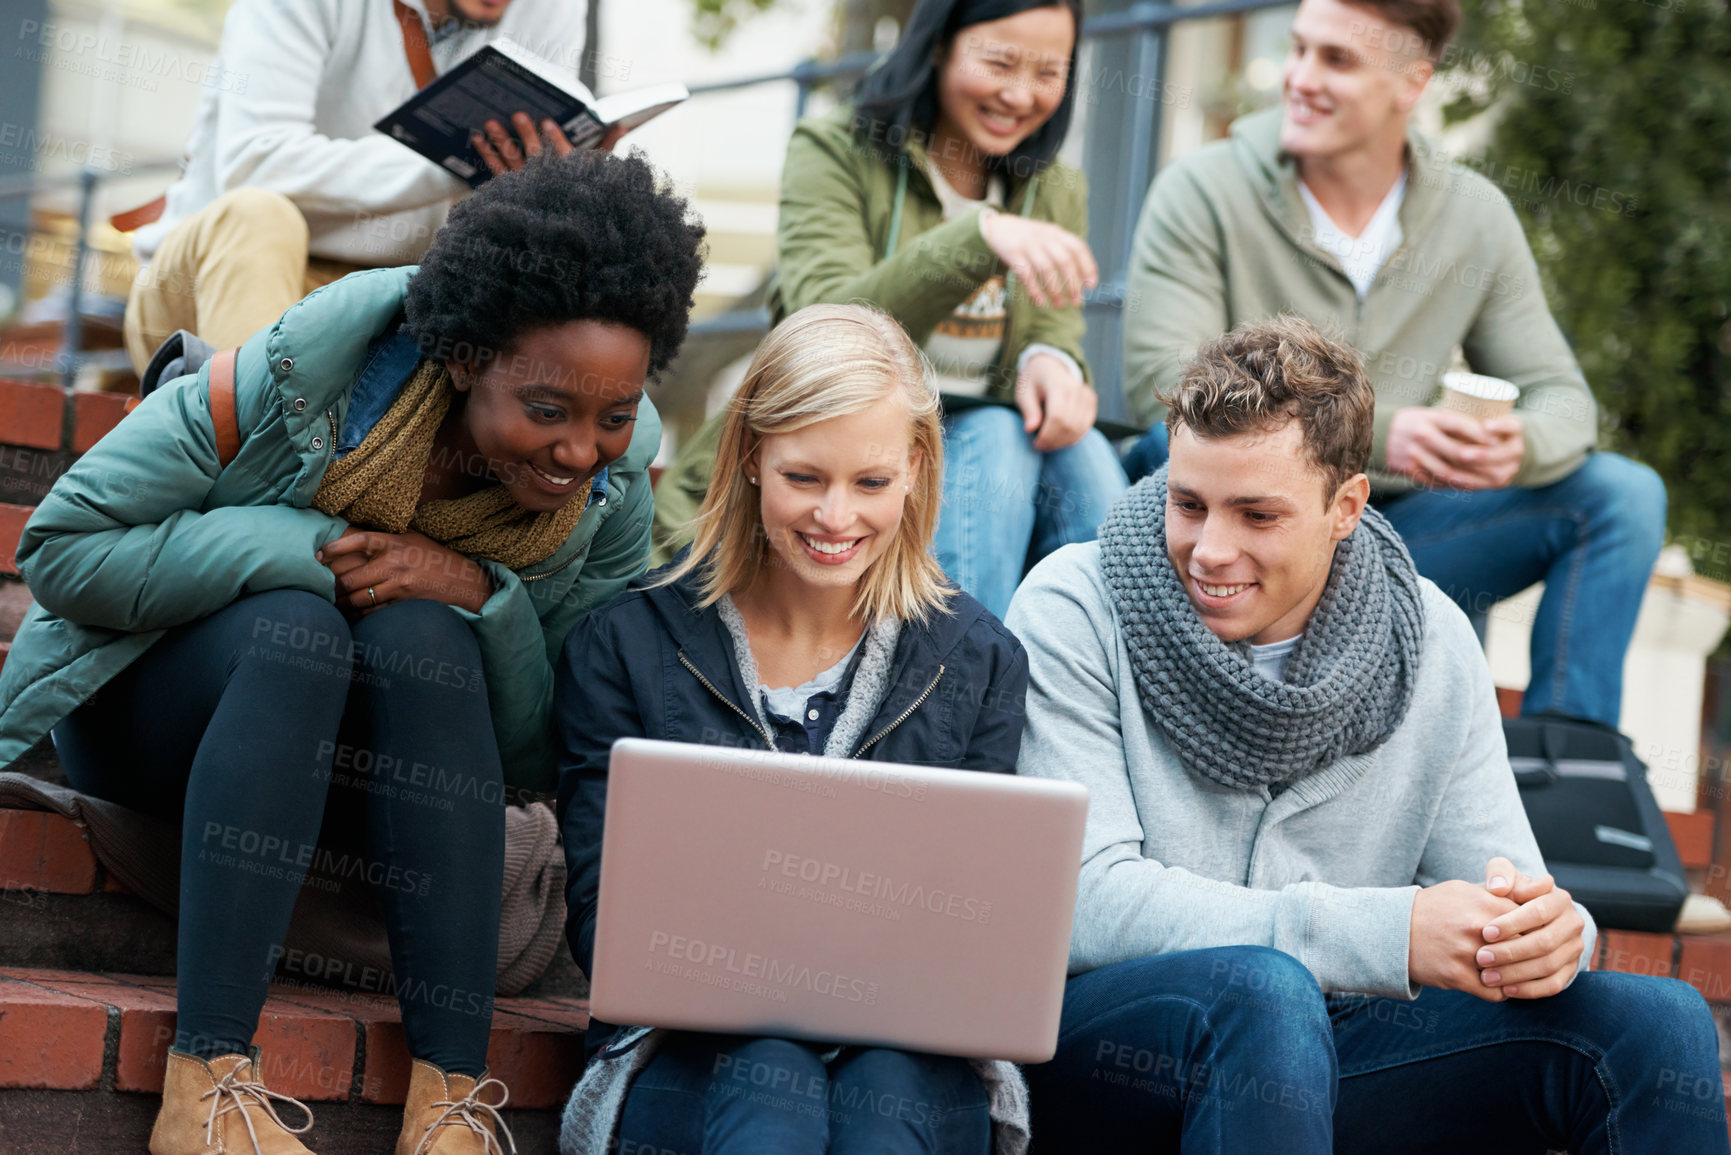 Buy stock photo Shot of a group of smiling university students looking at something on a laptop